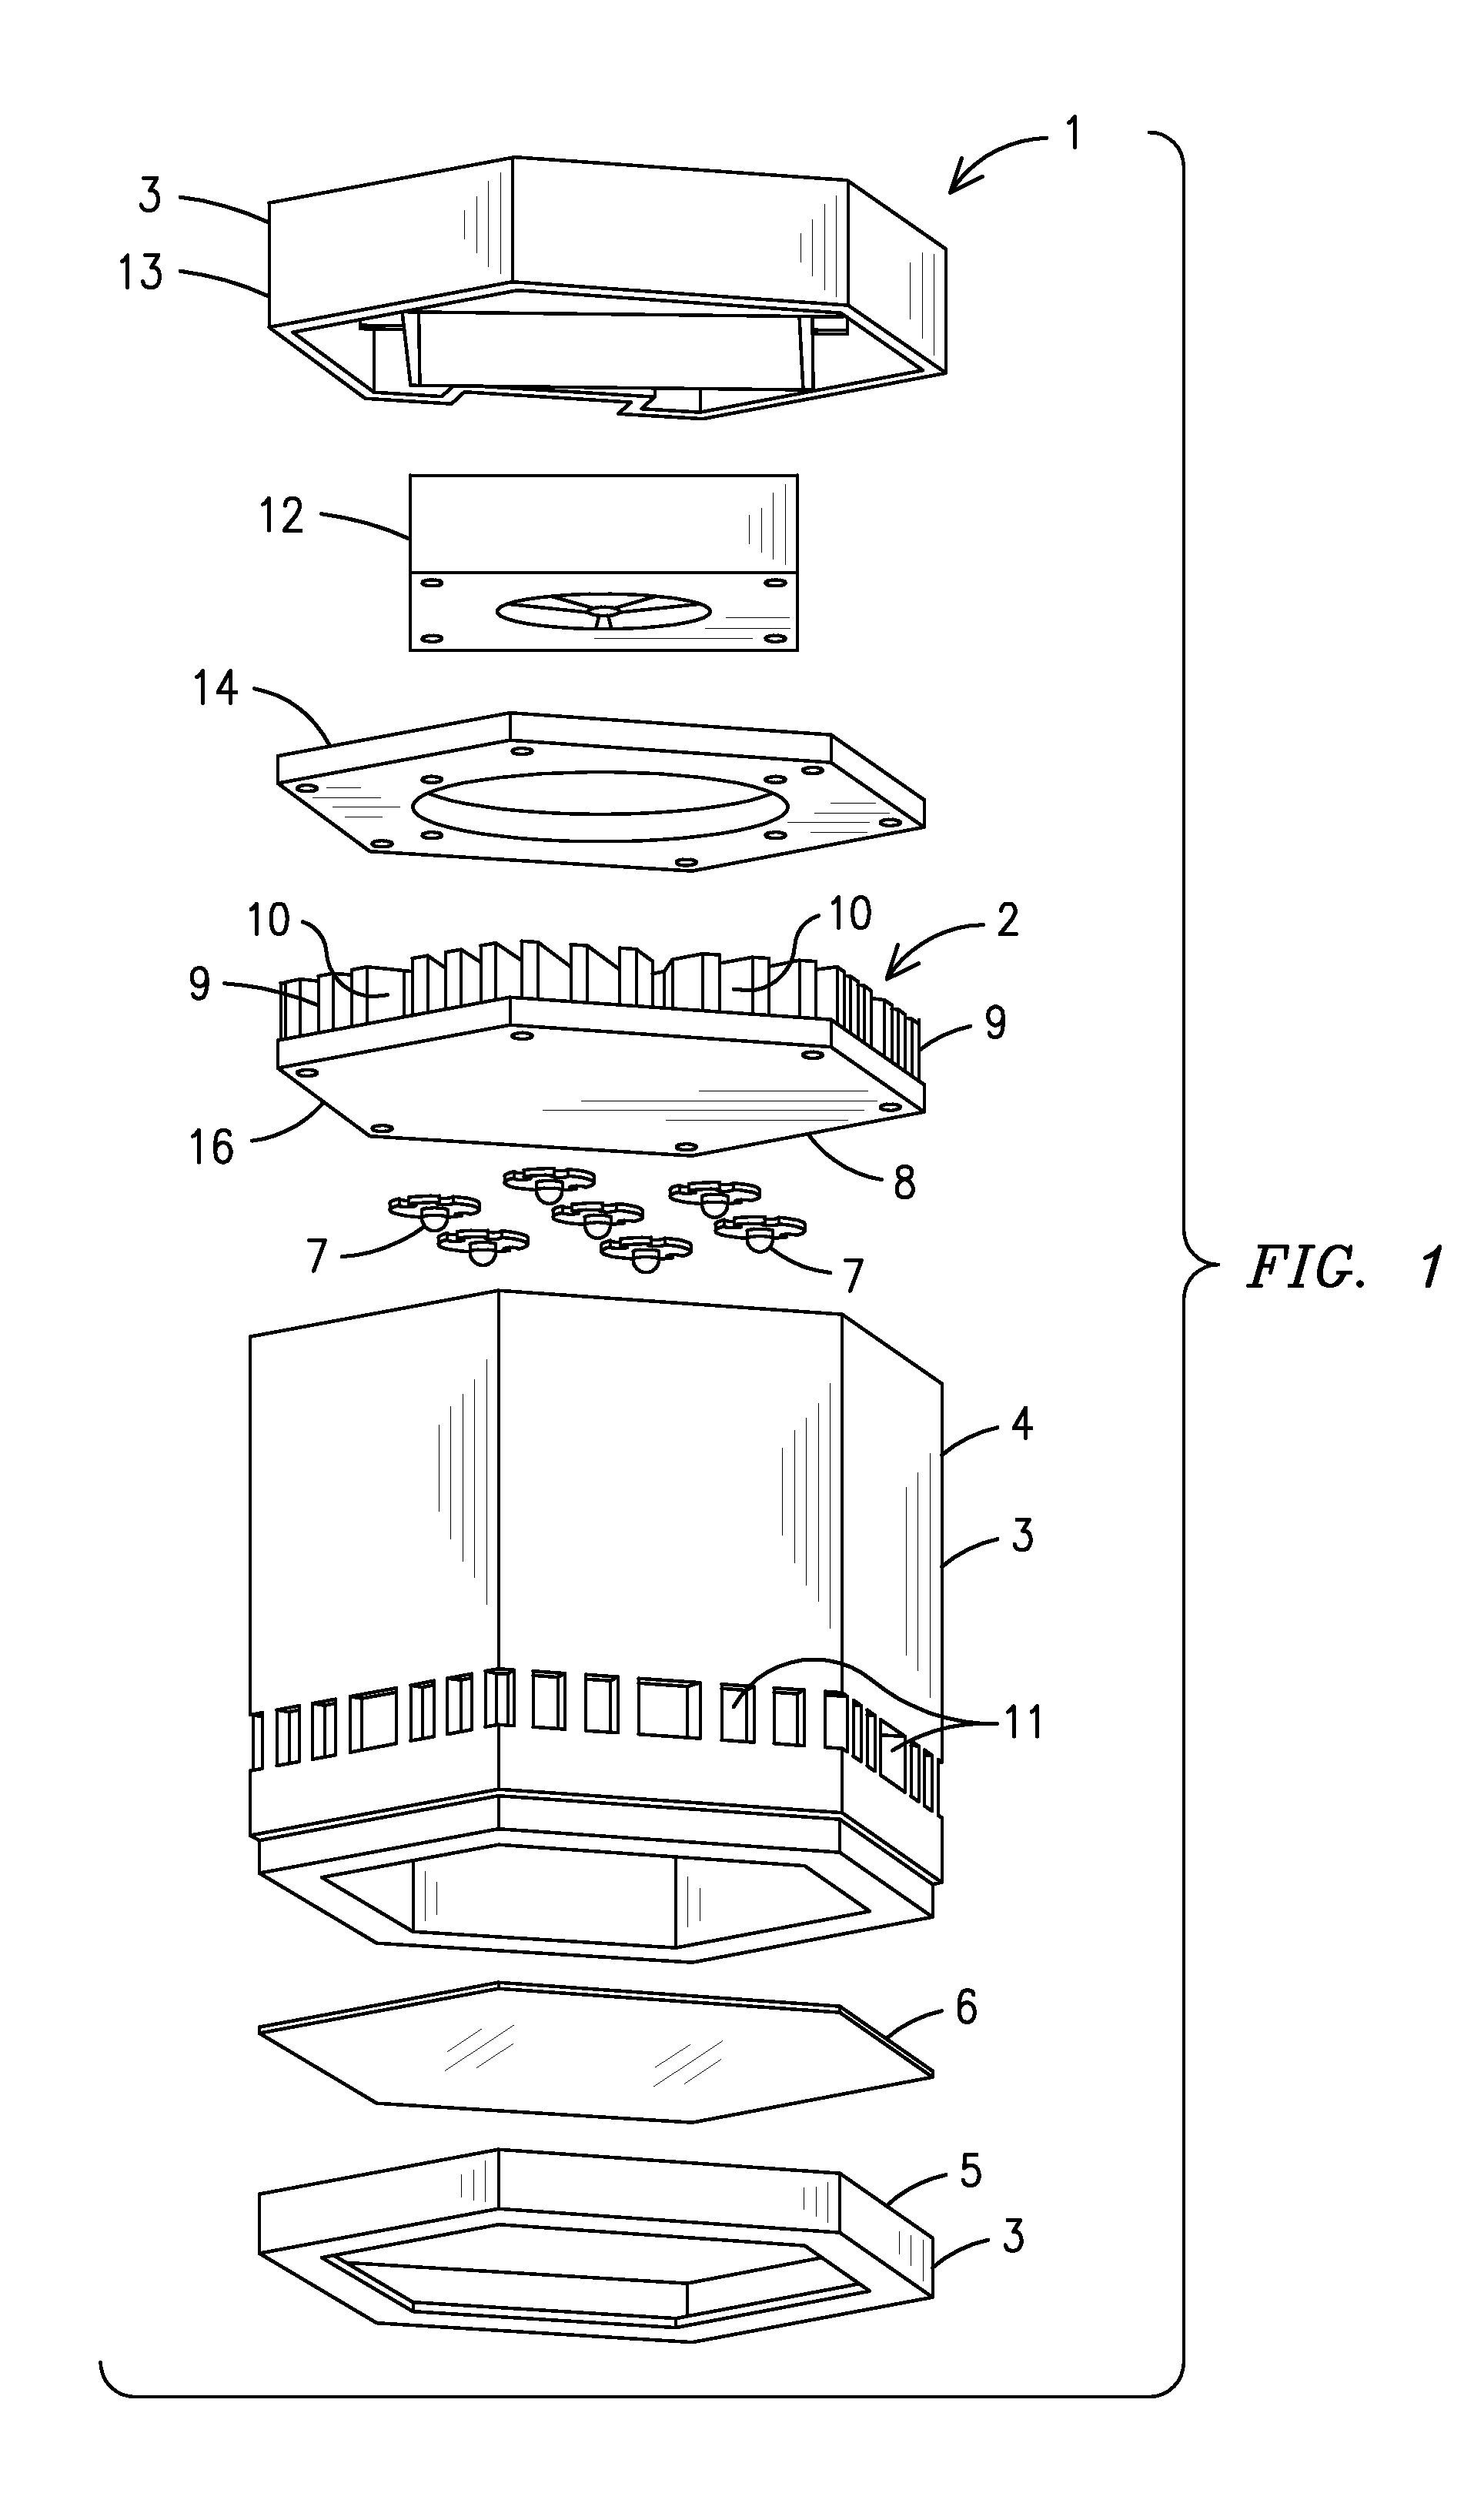 LED lamp with actively cooled heat sink